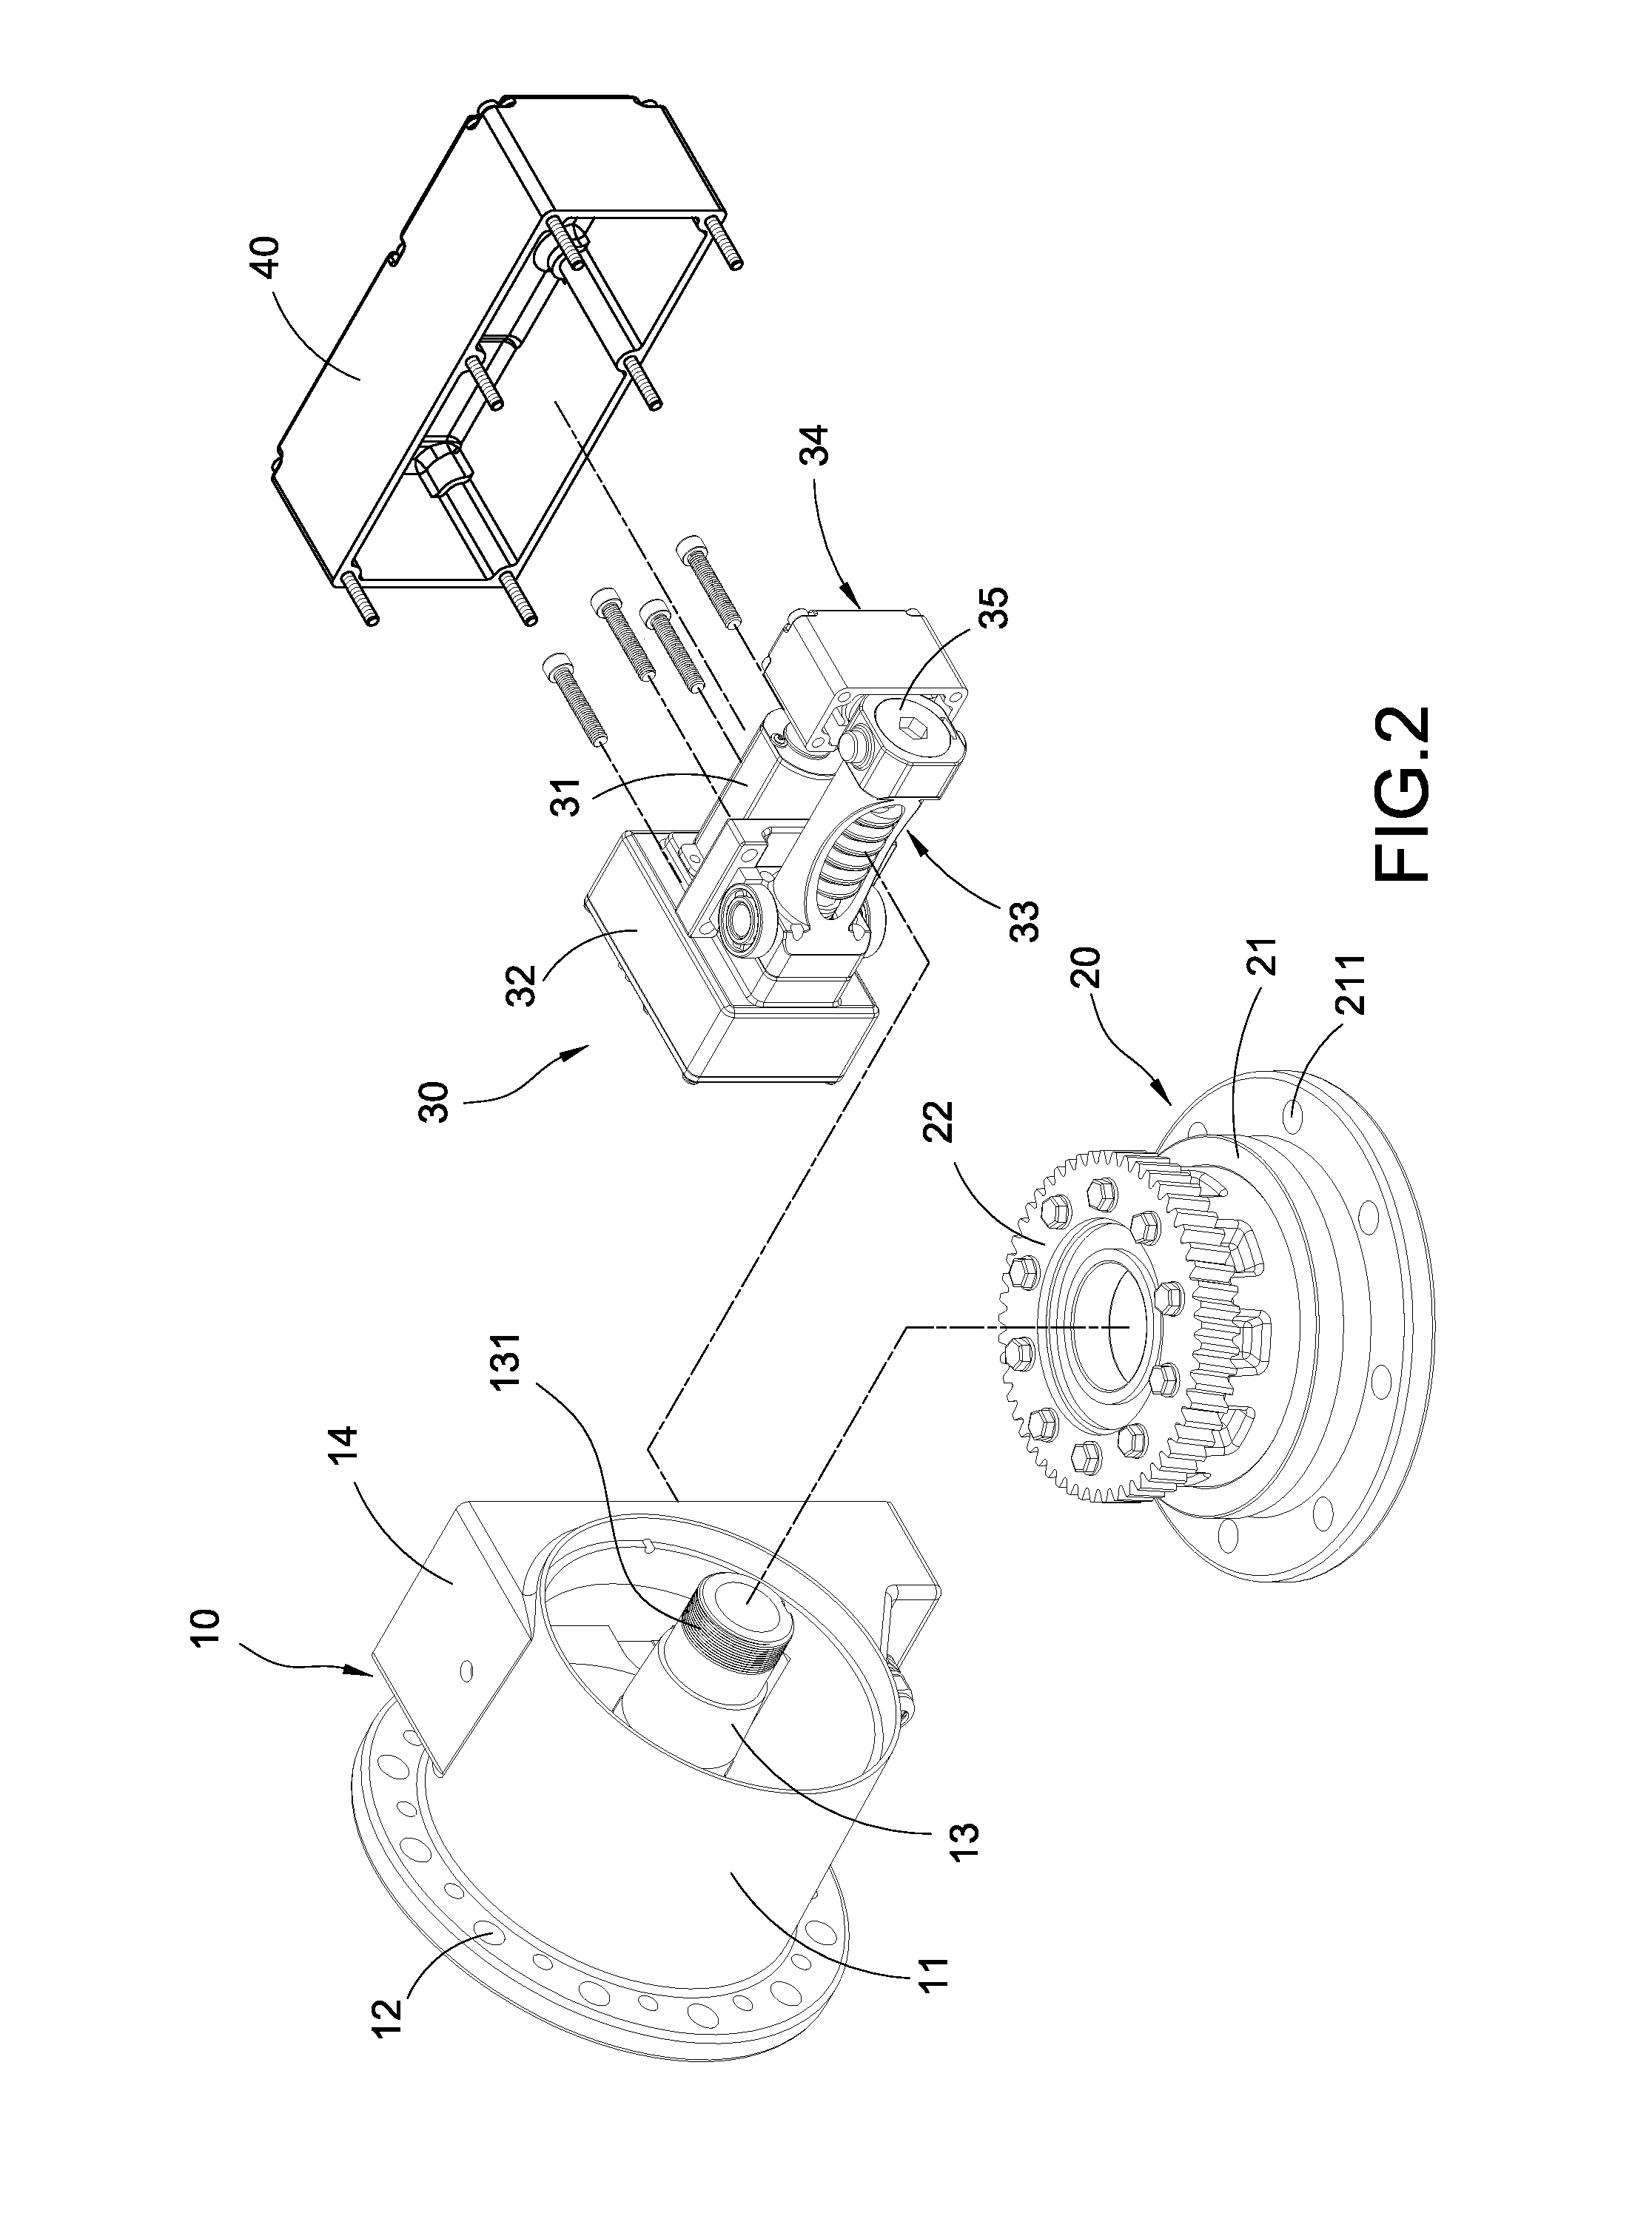 Steering device for use in solar tracking equipment